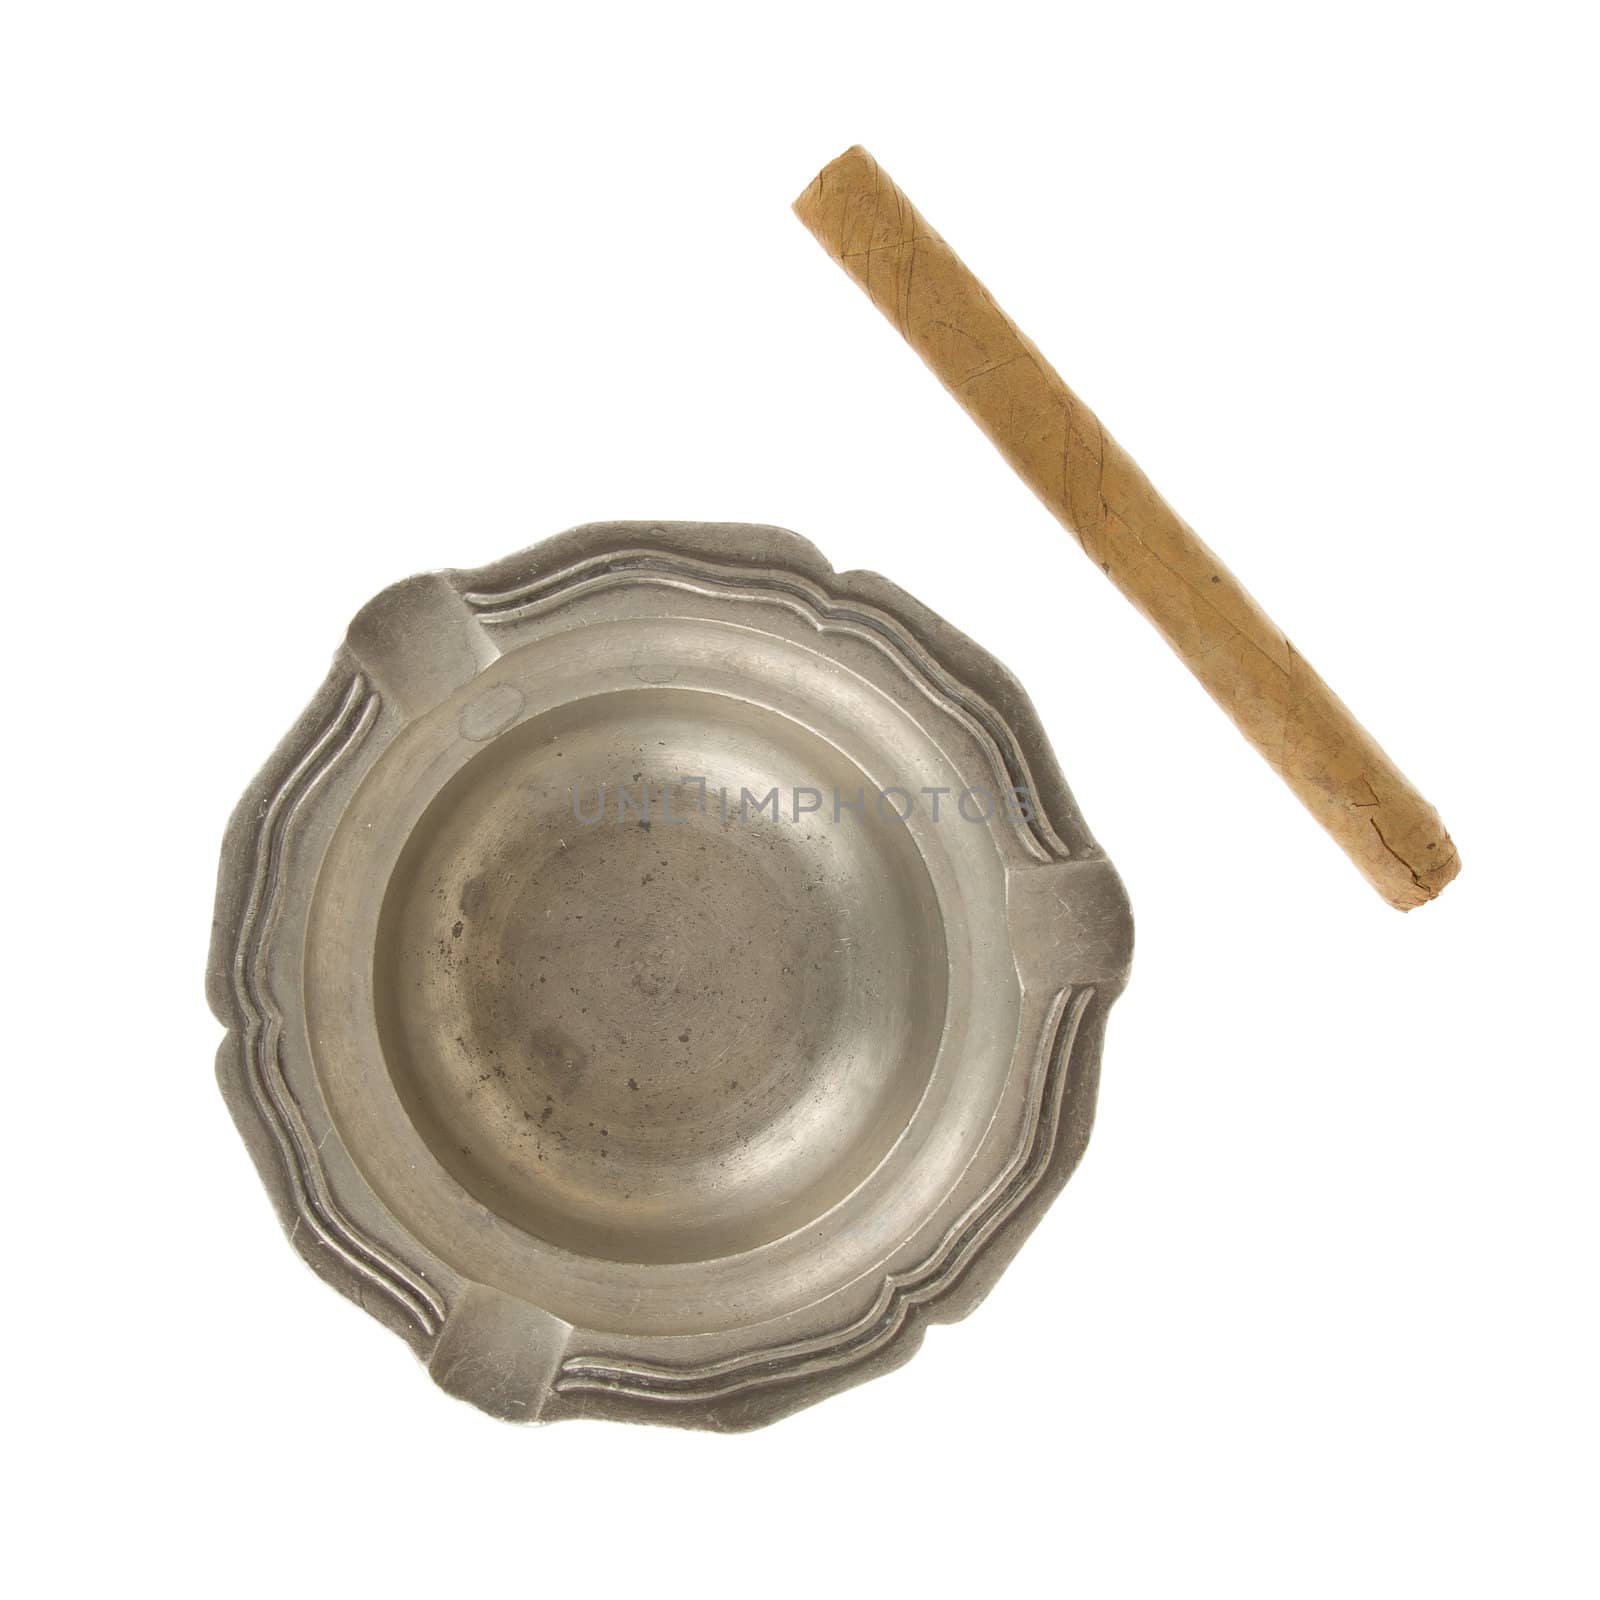 Unused large cigar with an old tin ashtray, isolated on white